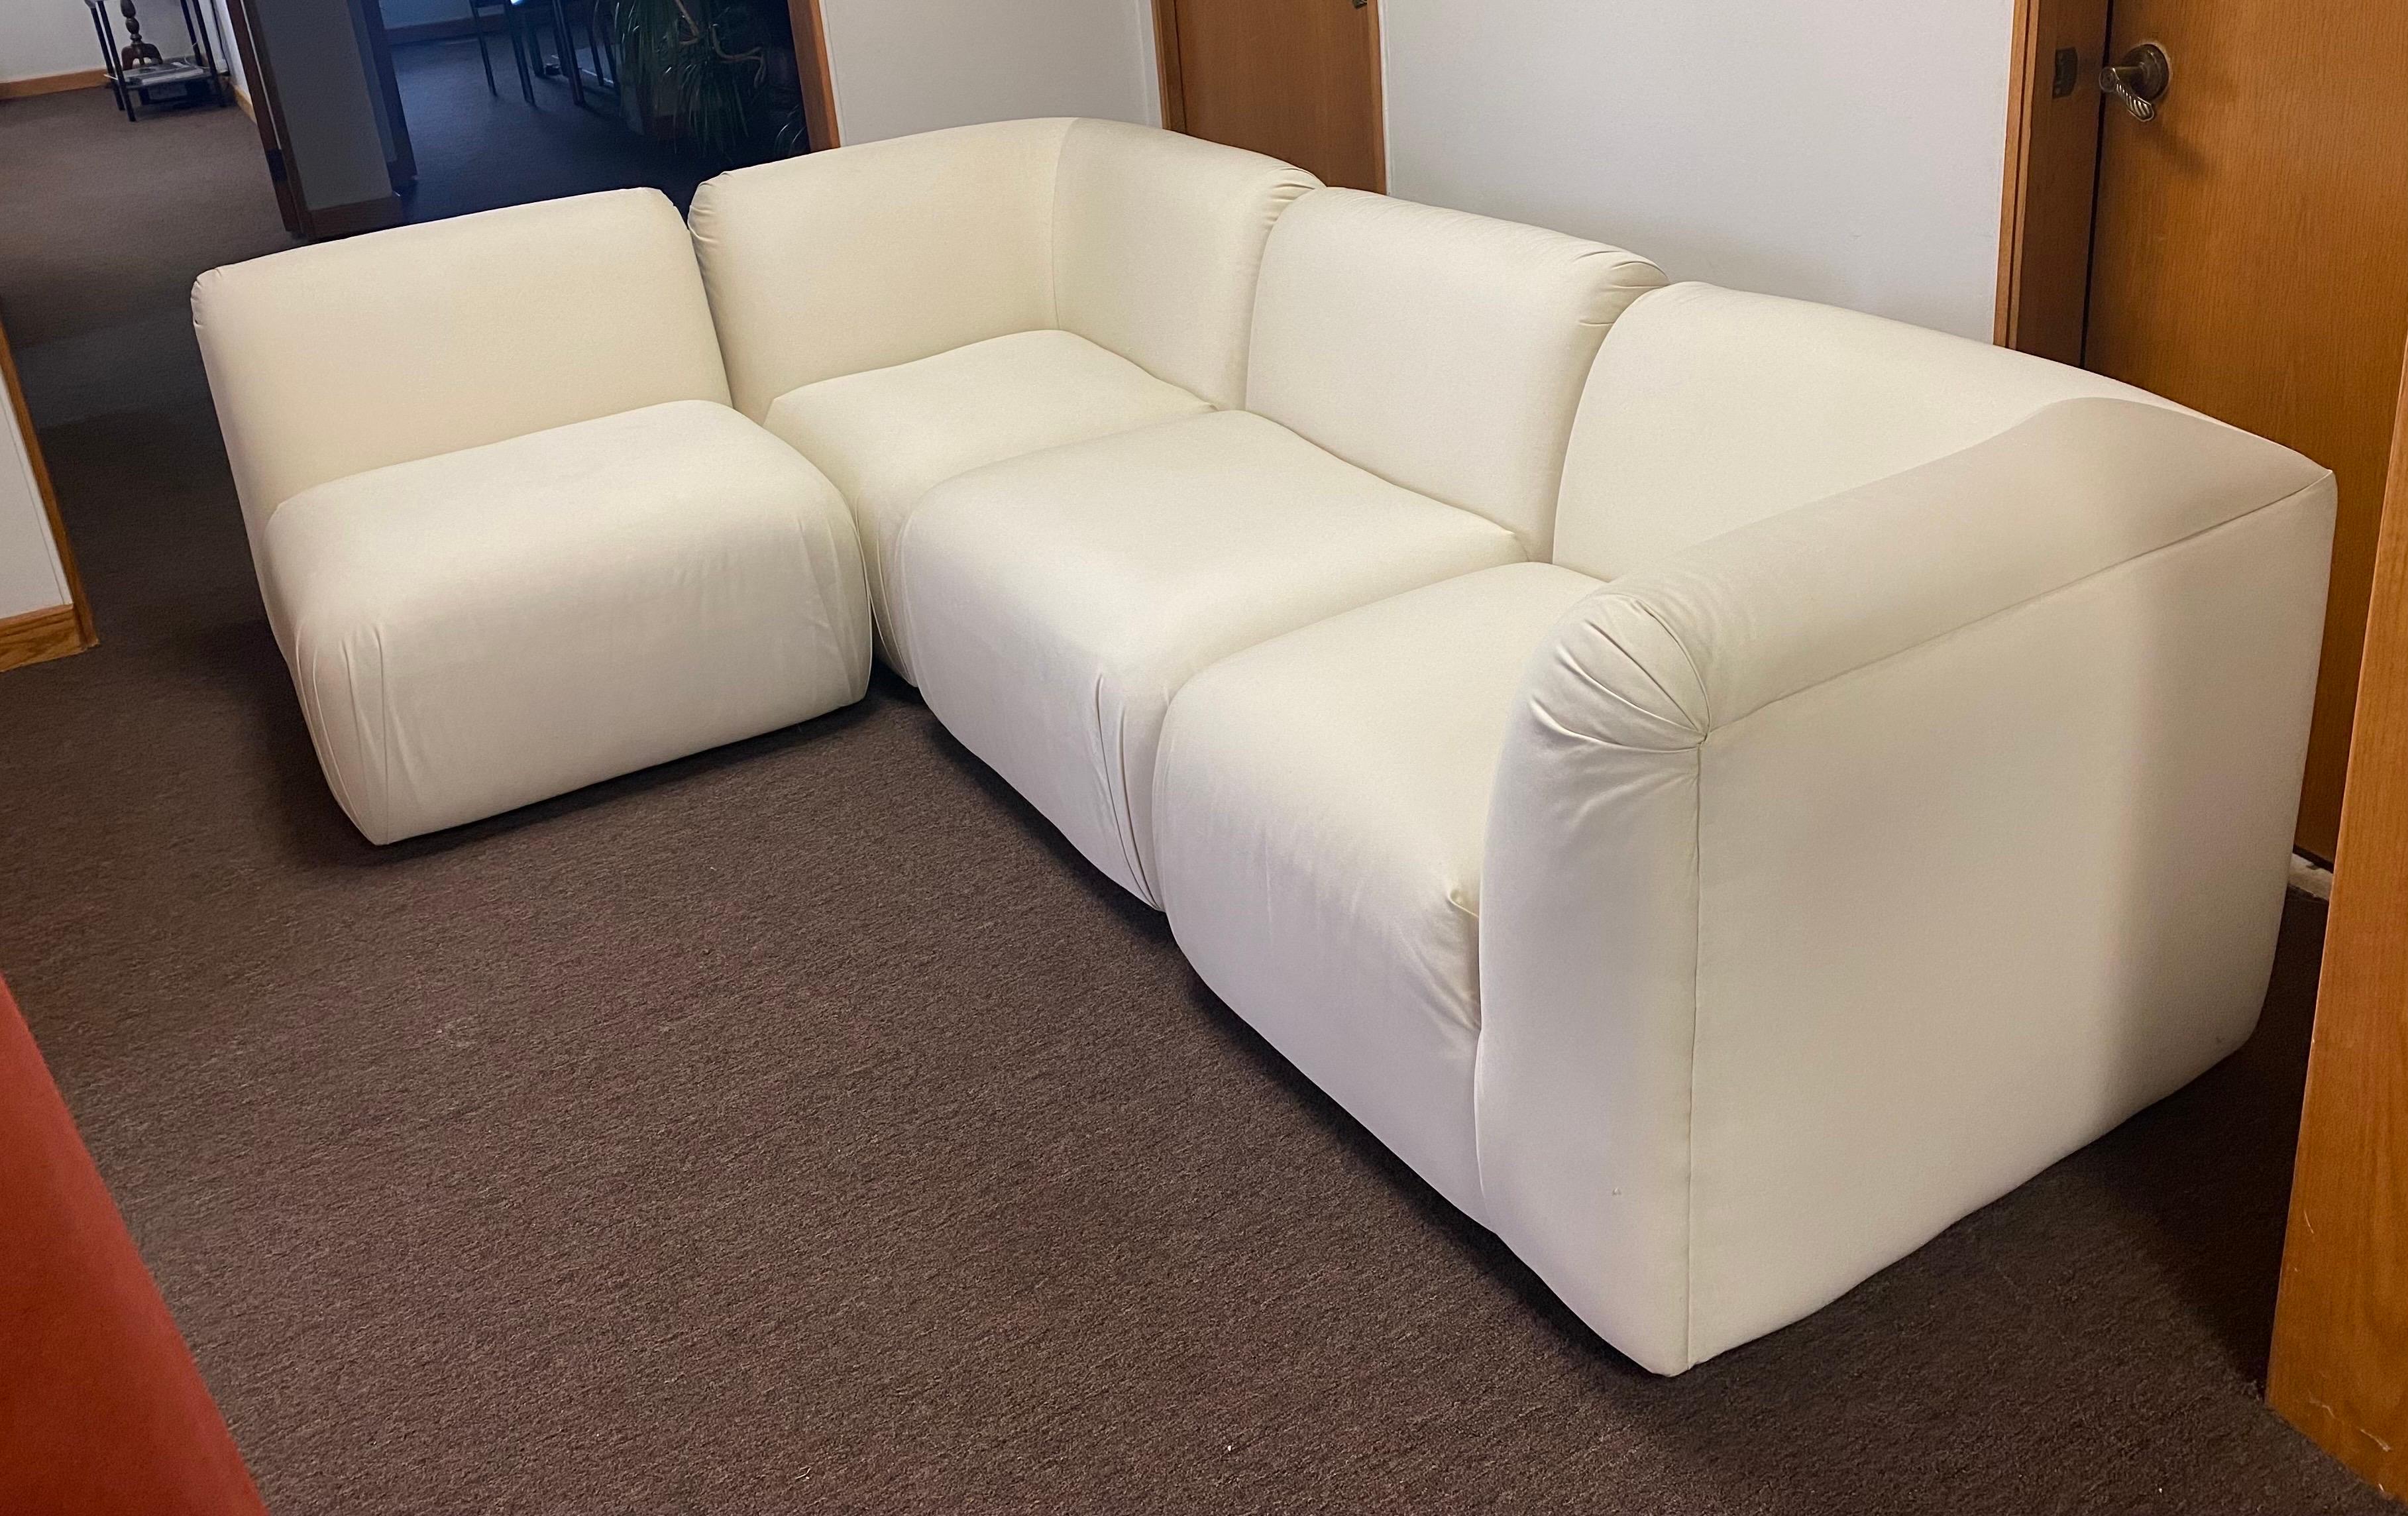 We are very pleased to offer a white, modern, four-piece sectional by Thayer Coggin, circa 1986. Showcasing both curved and linear elements, this piece offers a visual dialogue between structure and shapes. Tailored for a casual lounging experience,